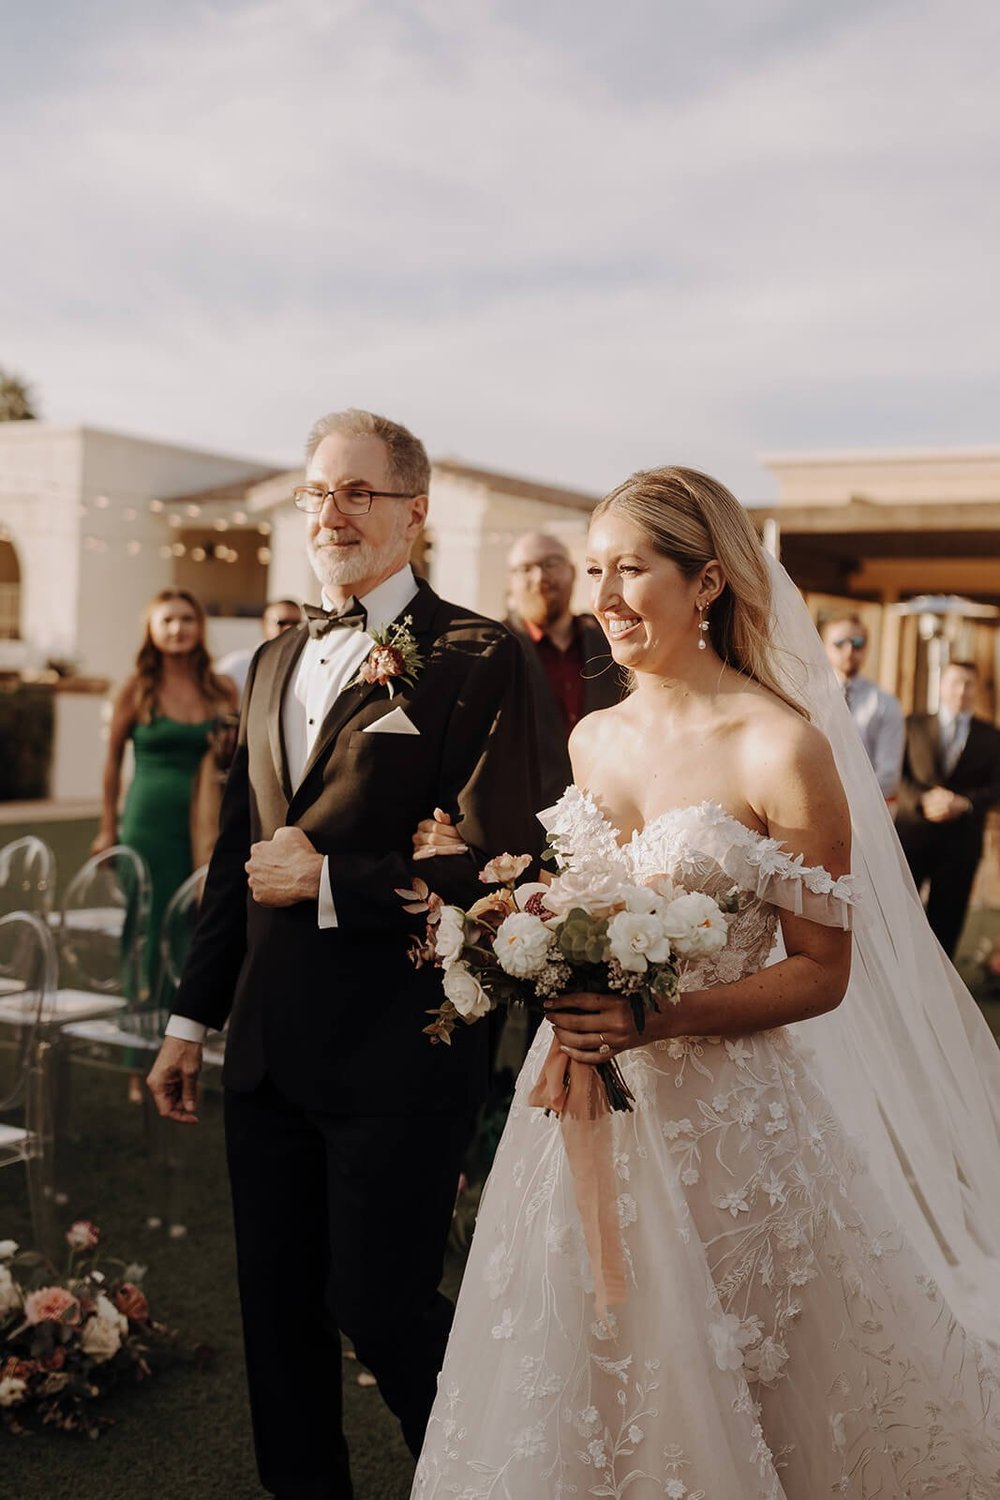 Father of the bride walks bride down the aisle at luxury outdoor wedding